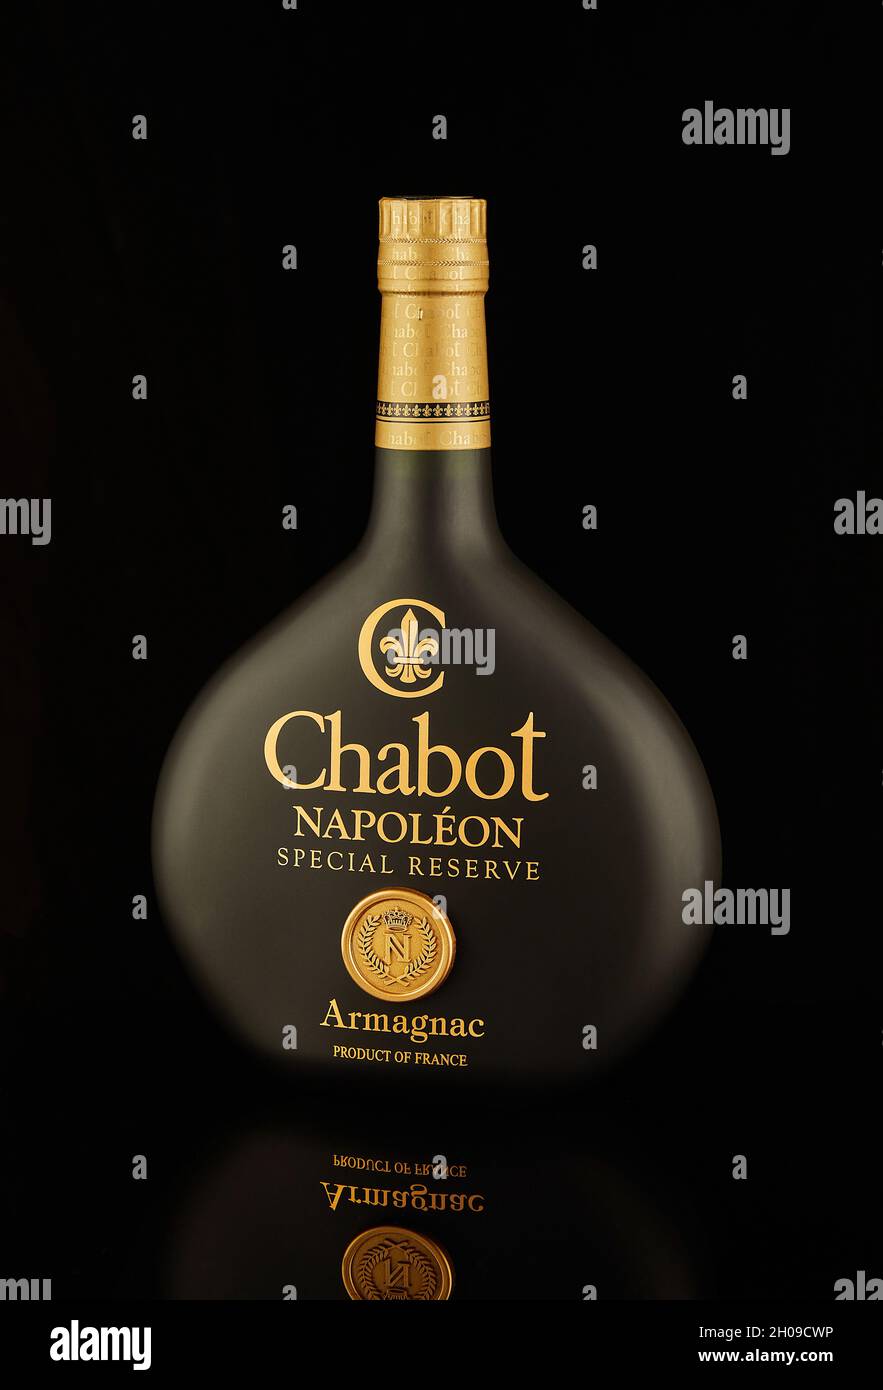 Armagnac Chabot, Napoleon Special Reserve made in France. Stock Photo